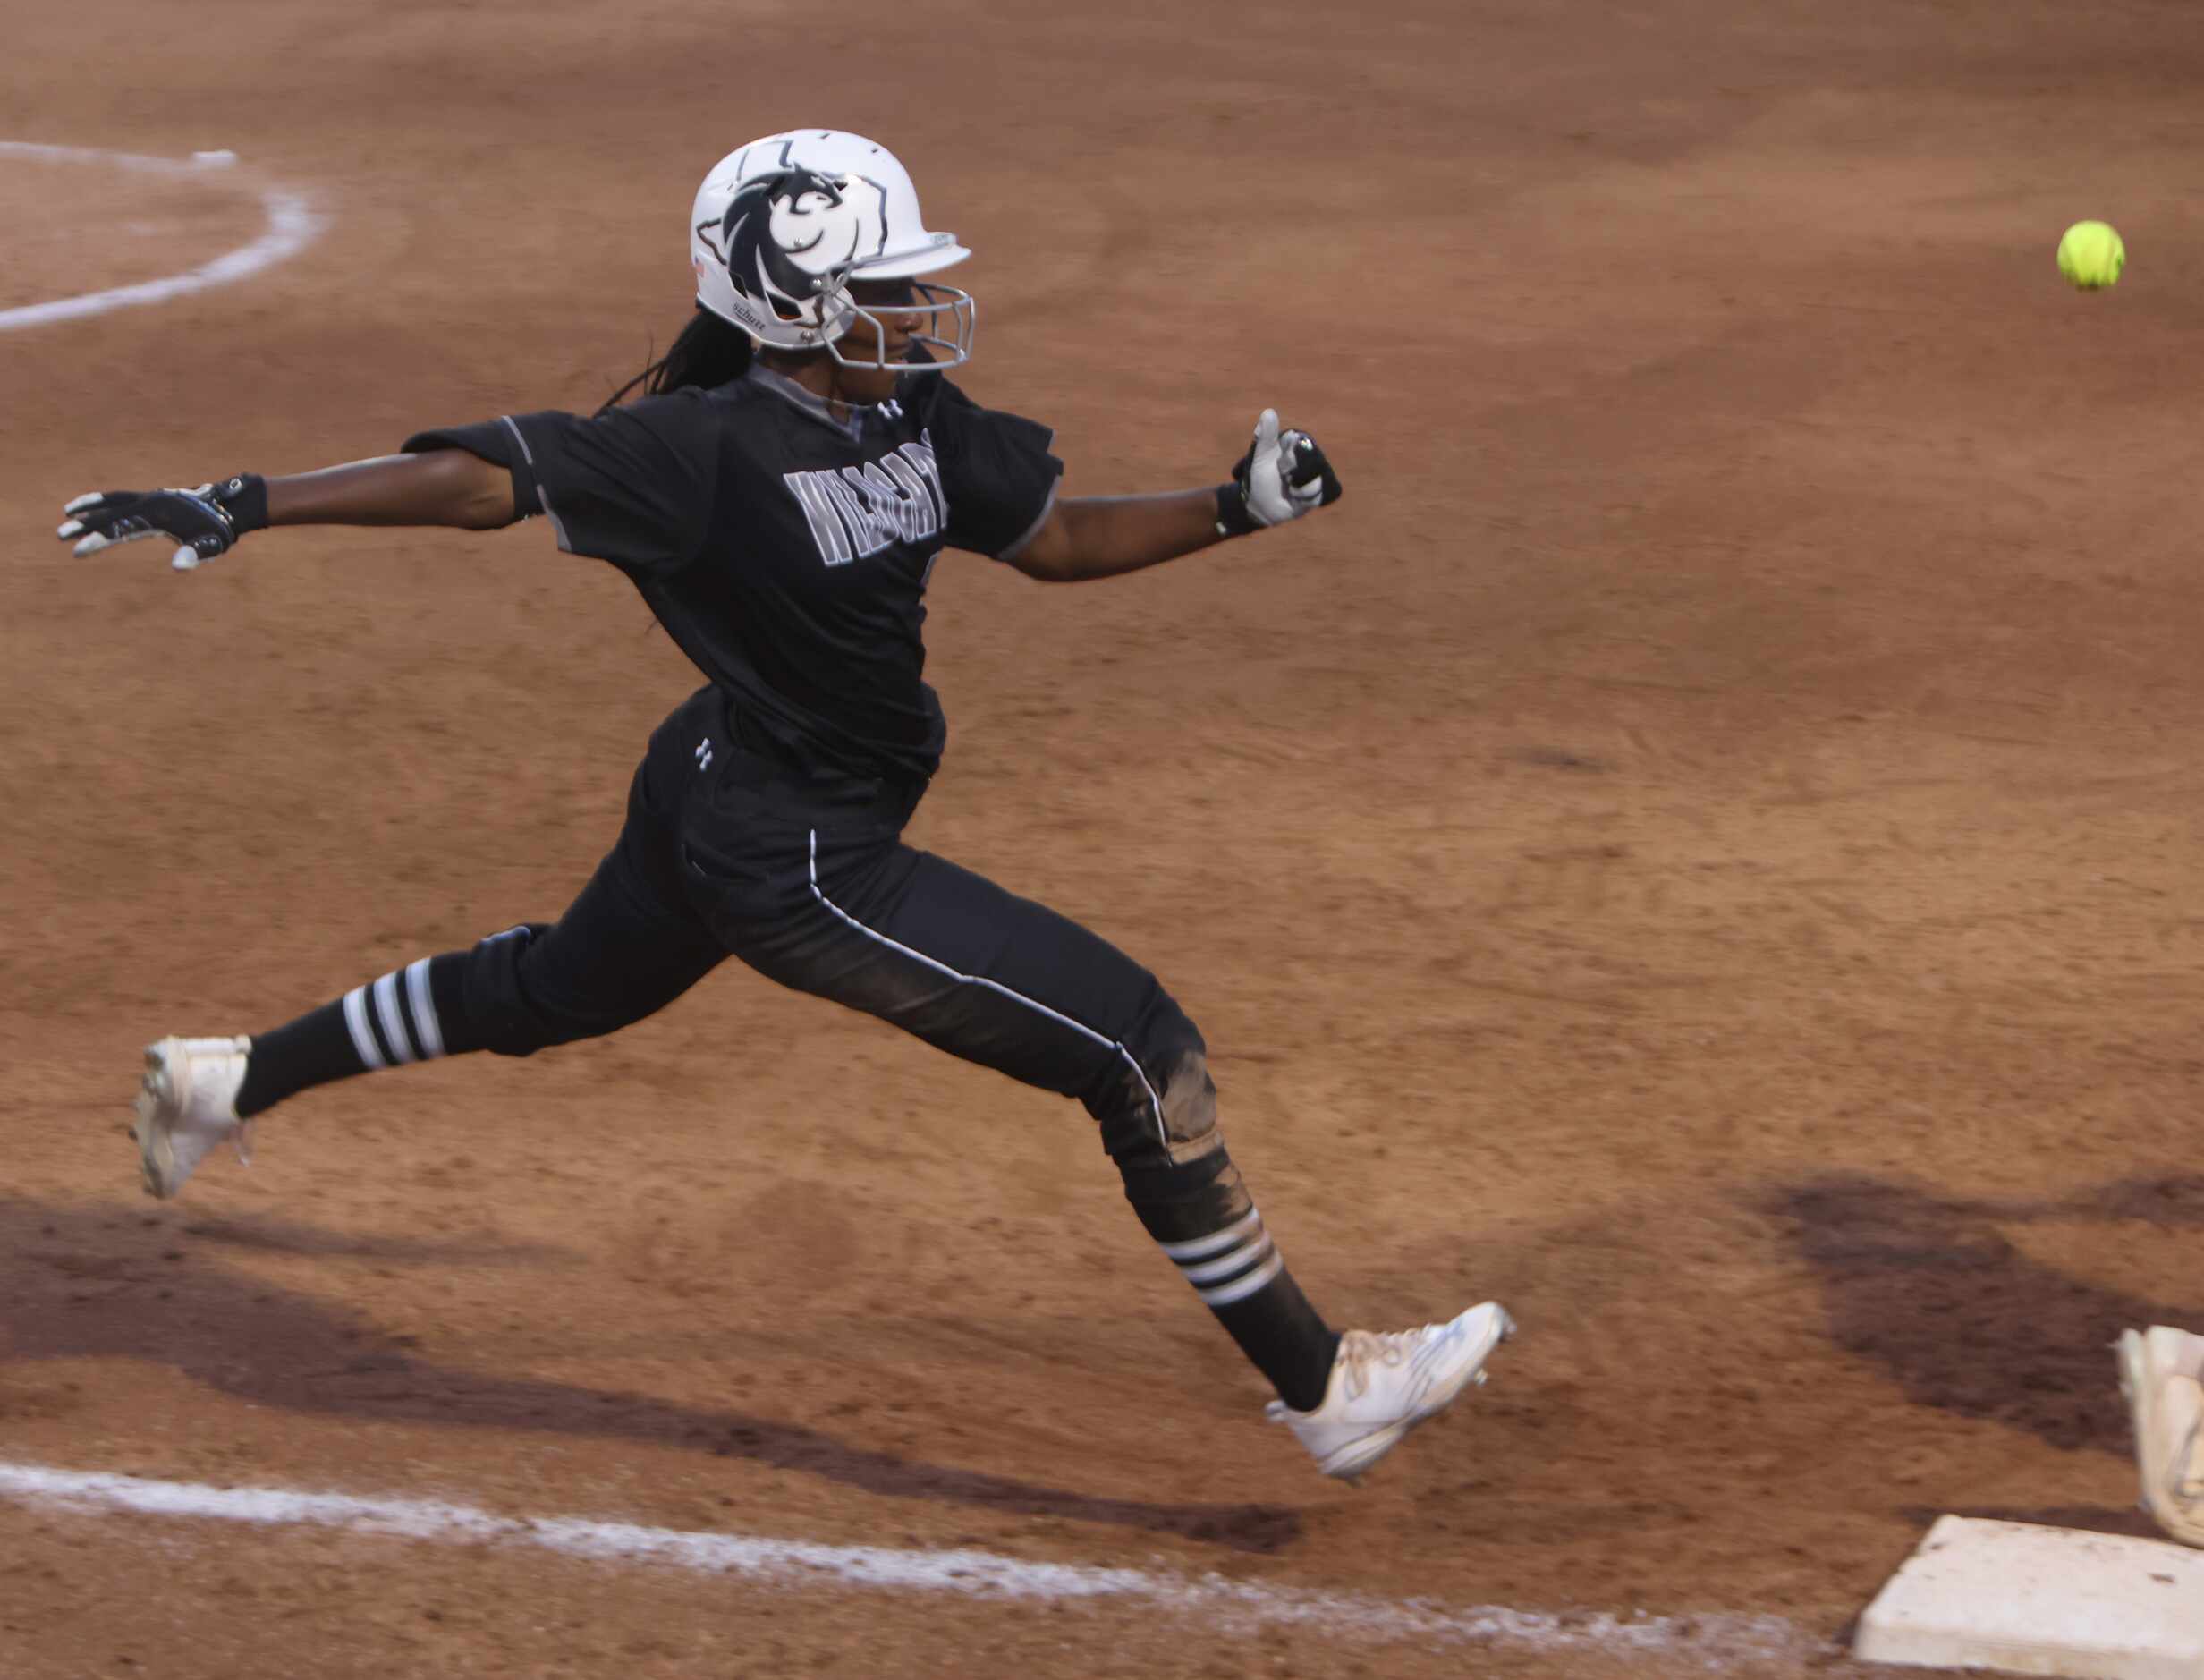 Denton Guyer outfielder Briana Williams (13) sprints down the baseline to beat out the throw...